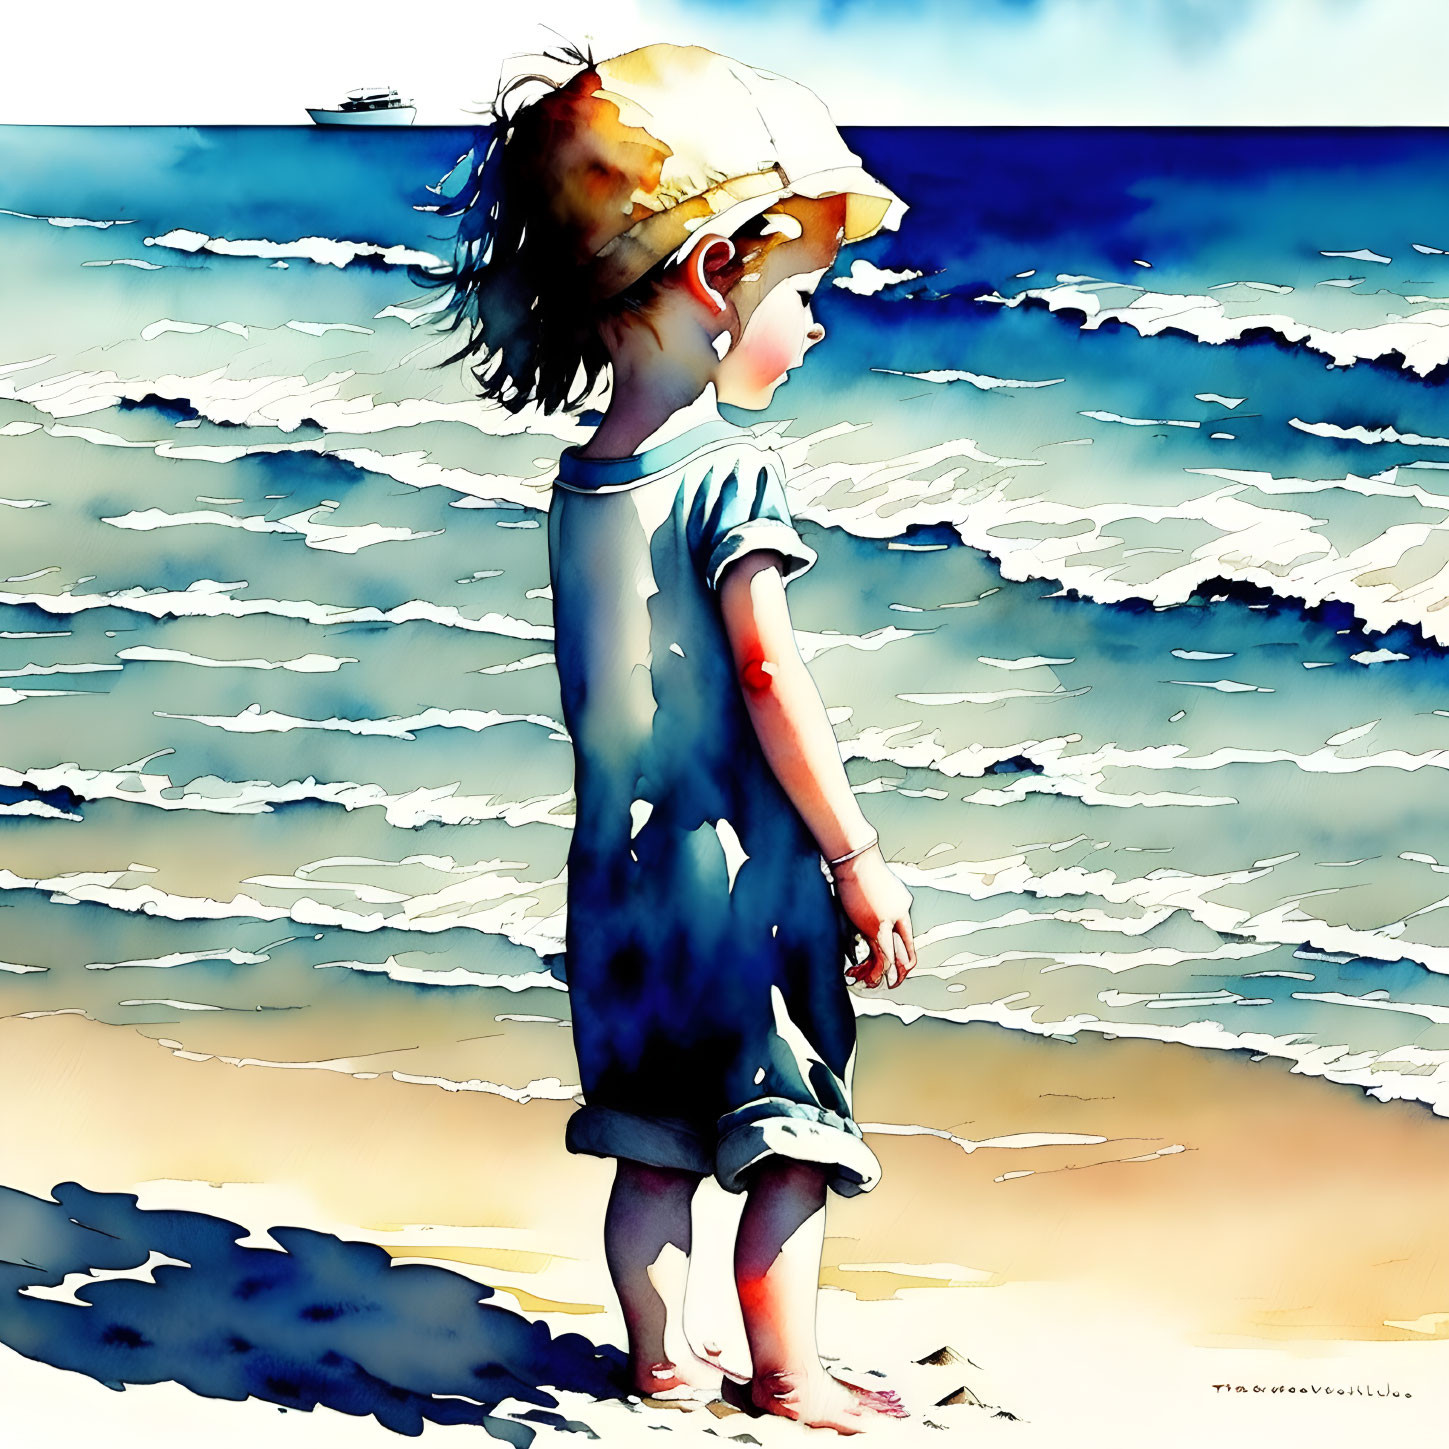 Child in Sun Hat and Blue Dress on Sandy Beach with Sea and Boat